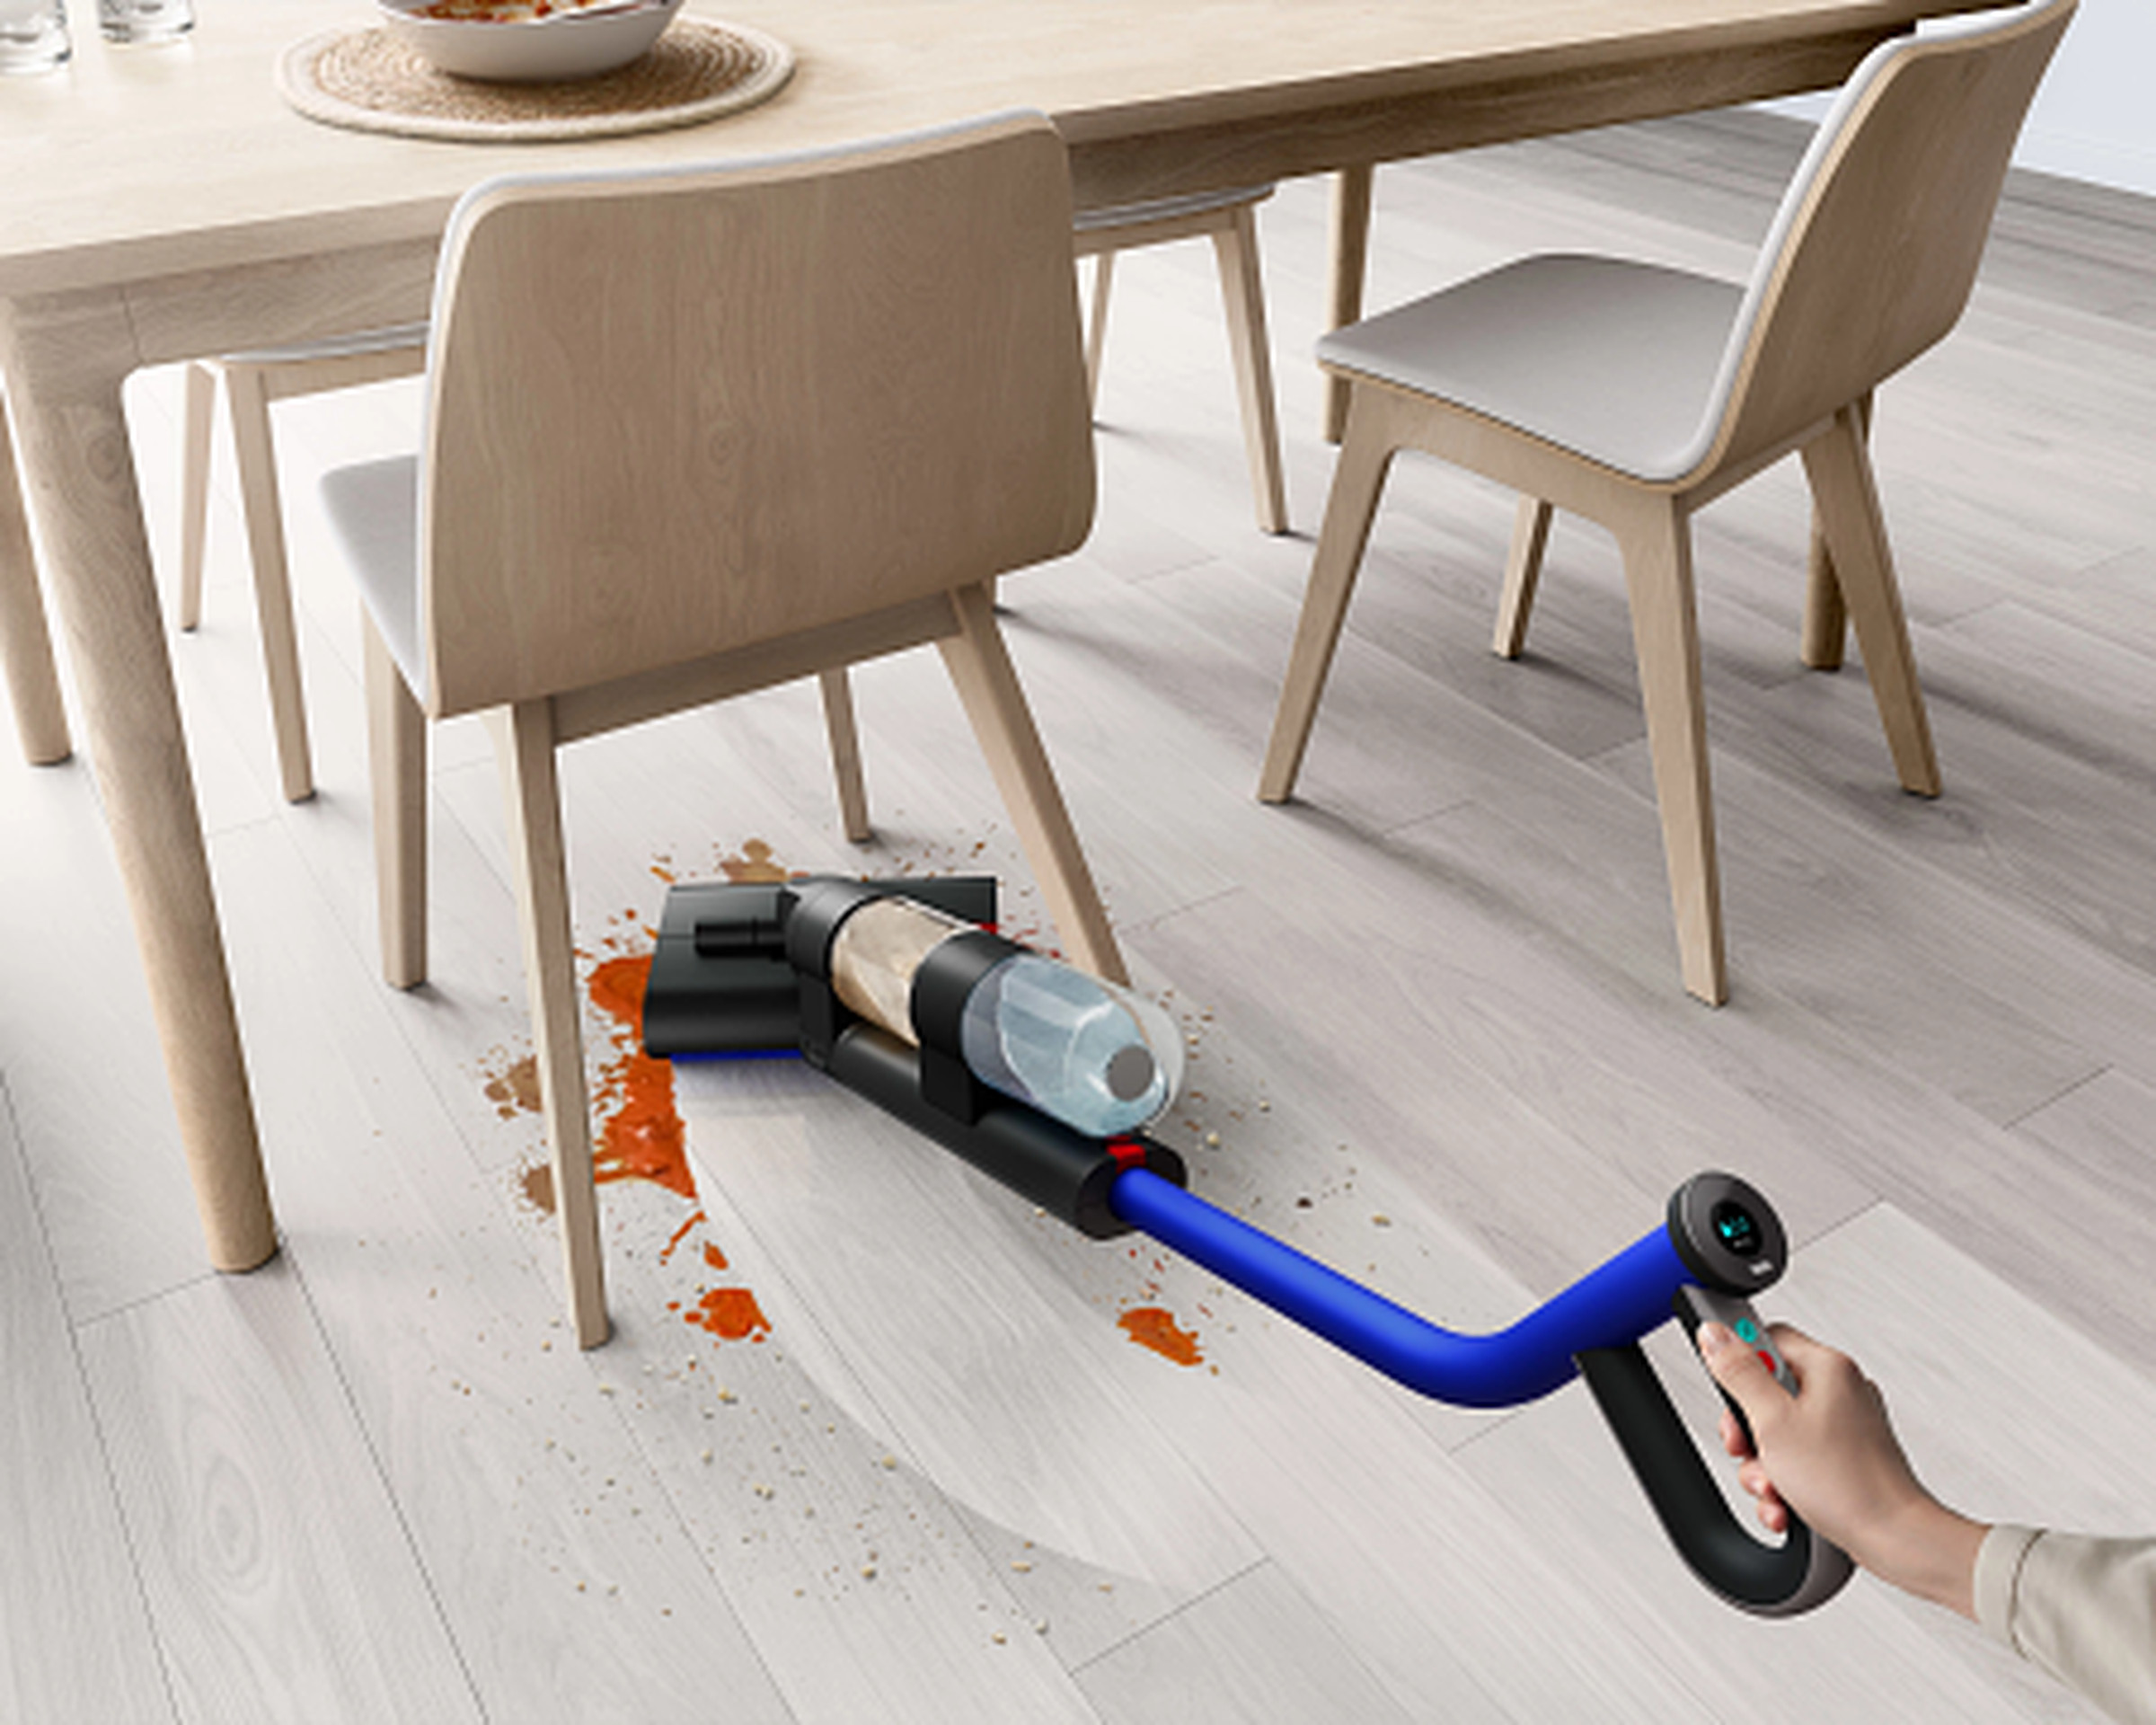 The Dyson WashG1 can wipe up wet messes.